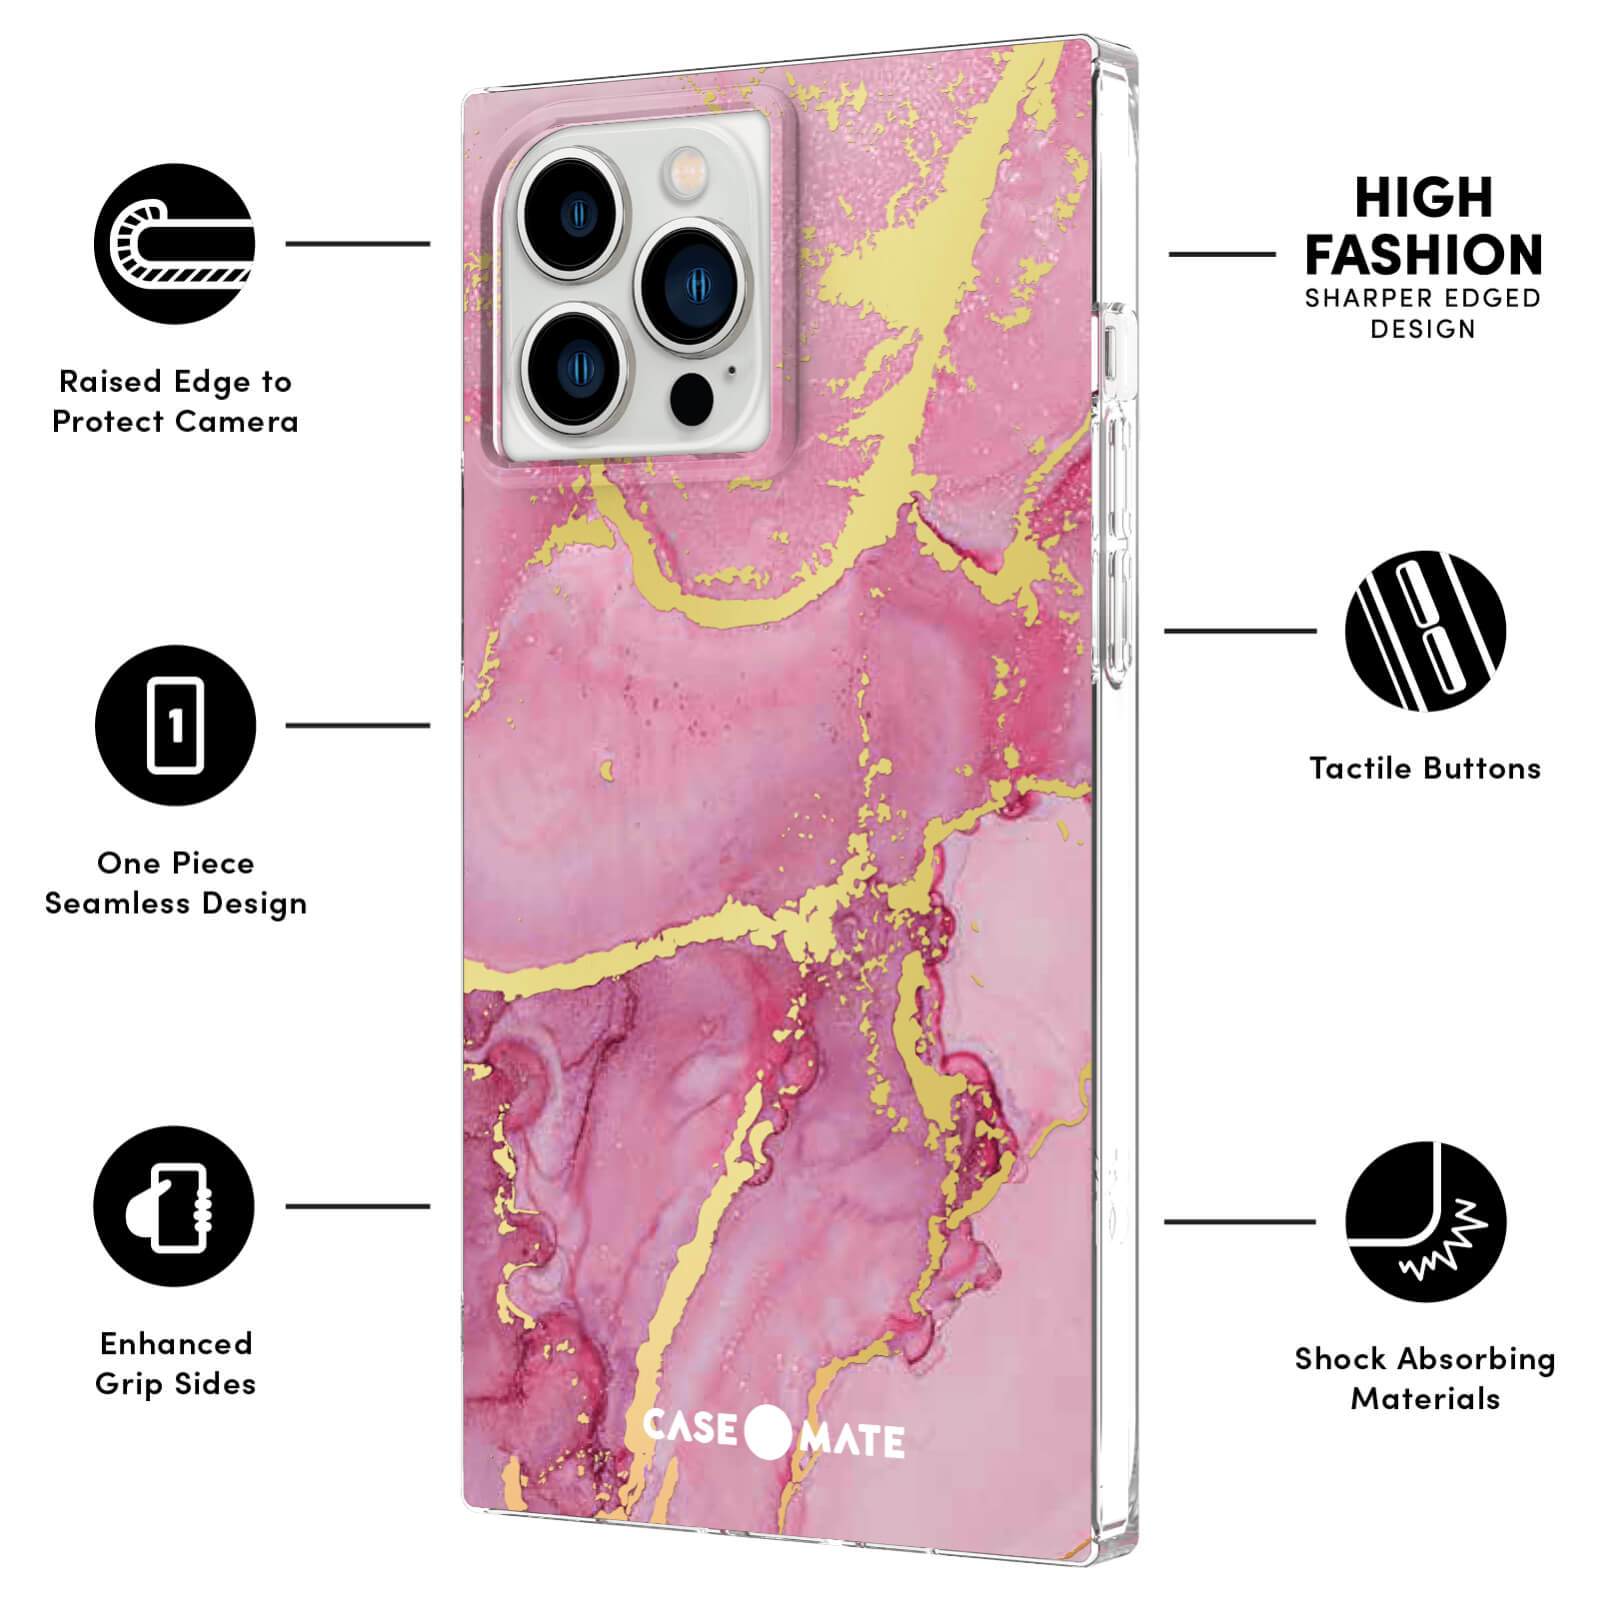 FEATURES: RAISED EDGE TO PROTECT CAMERA, ONE PIECE SEAMLESS DESIGN, ENHANCED GRIP SIDES, HIGH FASHION SHARPR EDGED DESIGN, TACTILE BUTTONS, SHOCK ABSORBING MATERIALS. COLOR::MAGENTA MARBLE